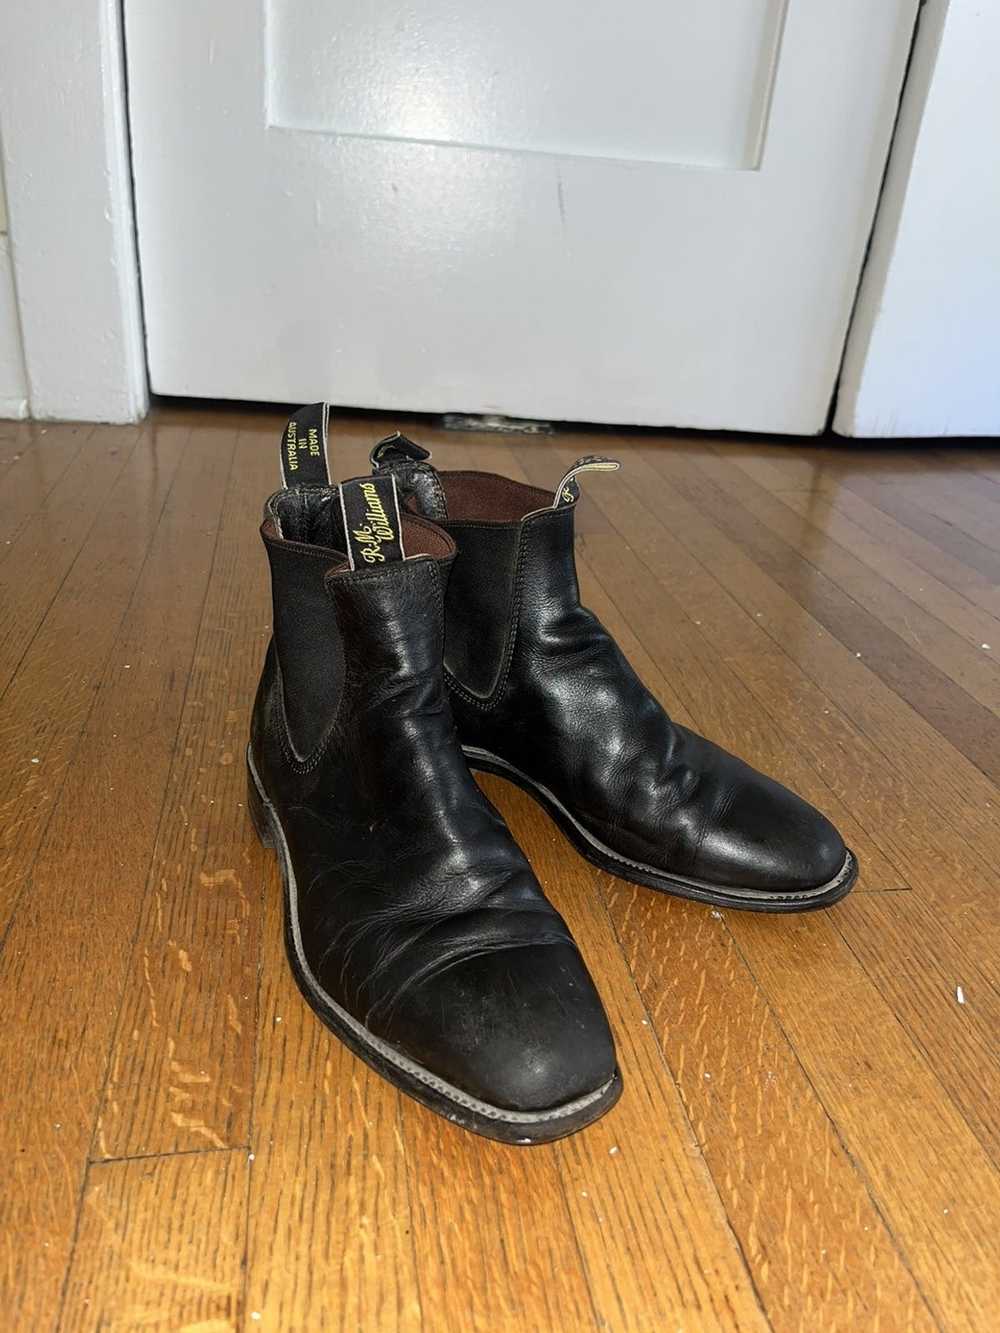 R.M. WILLIAMS Ankle Boots Sz. 10 (US) Black Round Toe Old Stock